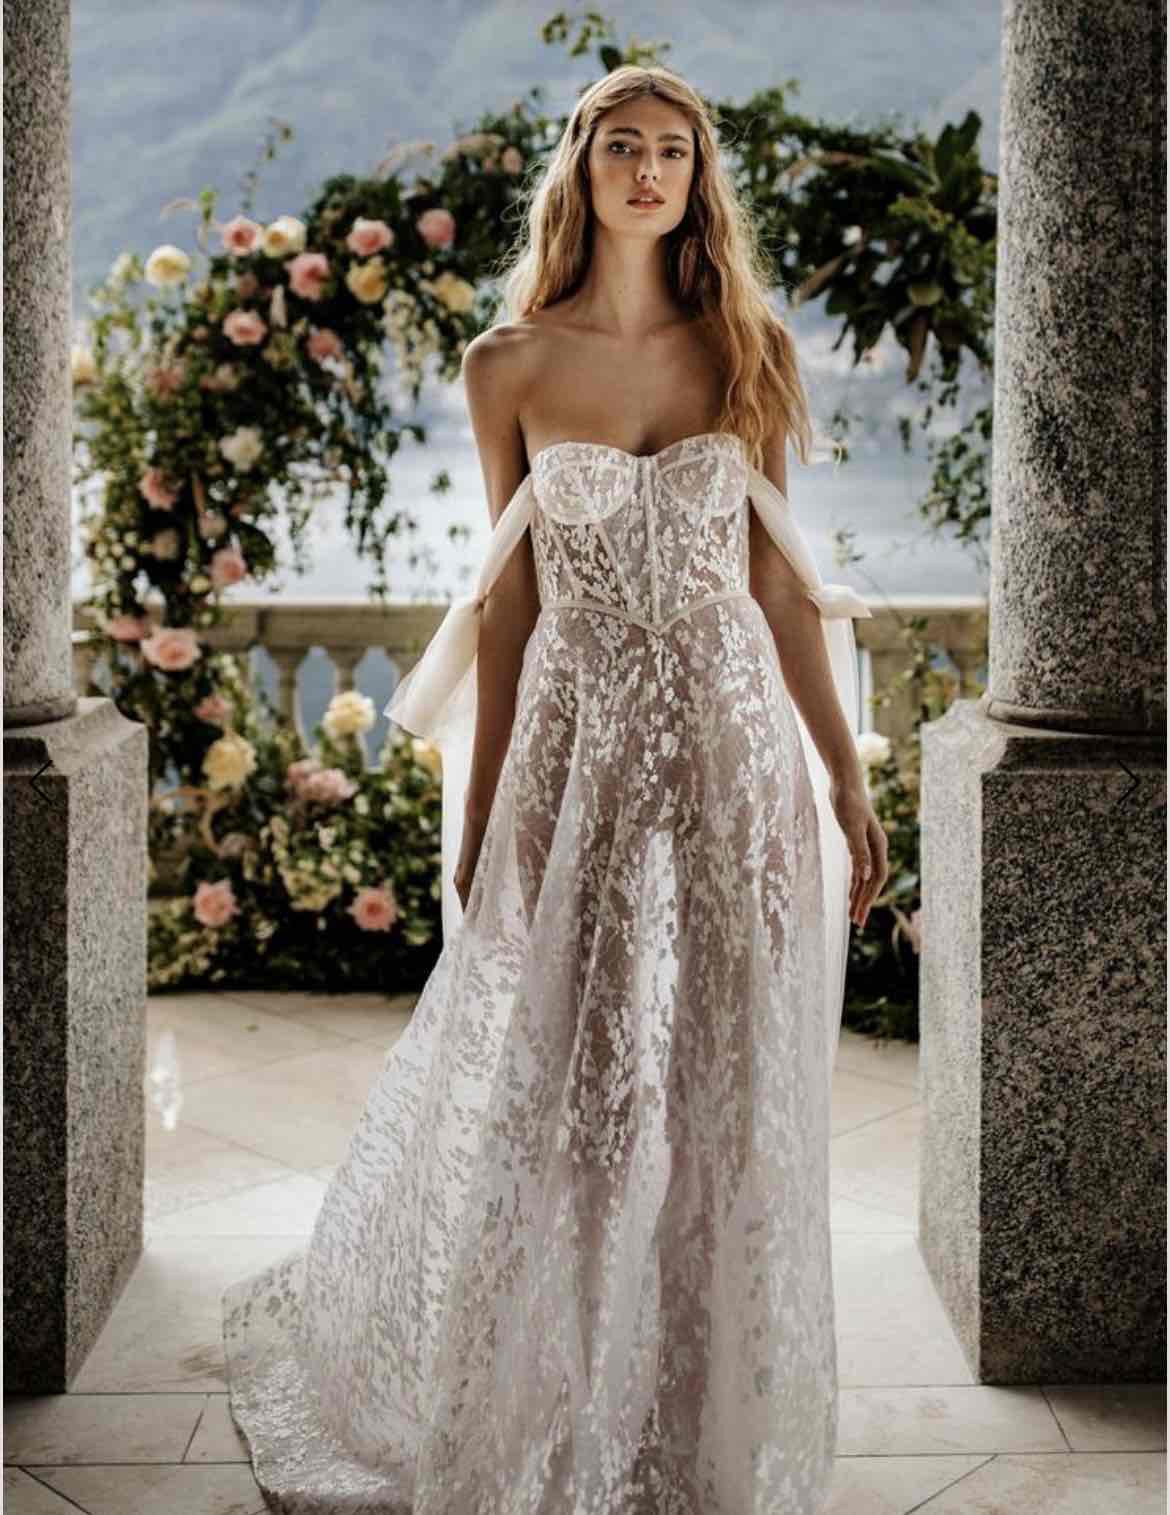 Barely There: 55 Sheer Wedding Dress Styles – Stillwhite Blog  Sheer  wedding dress, Berta wedding dress, Wedding dress styles